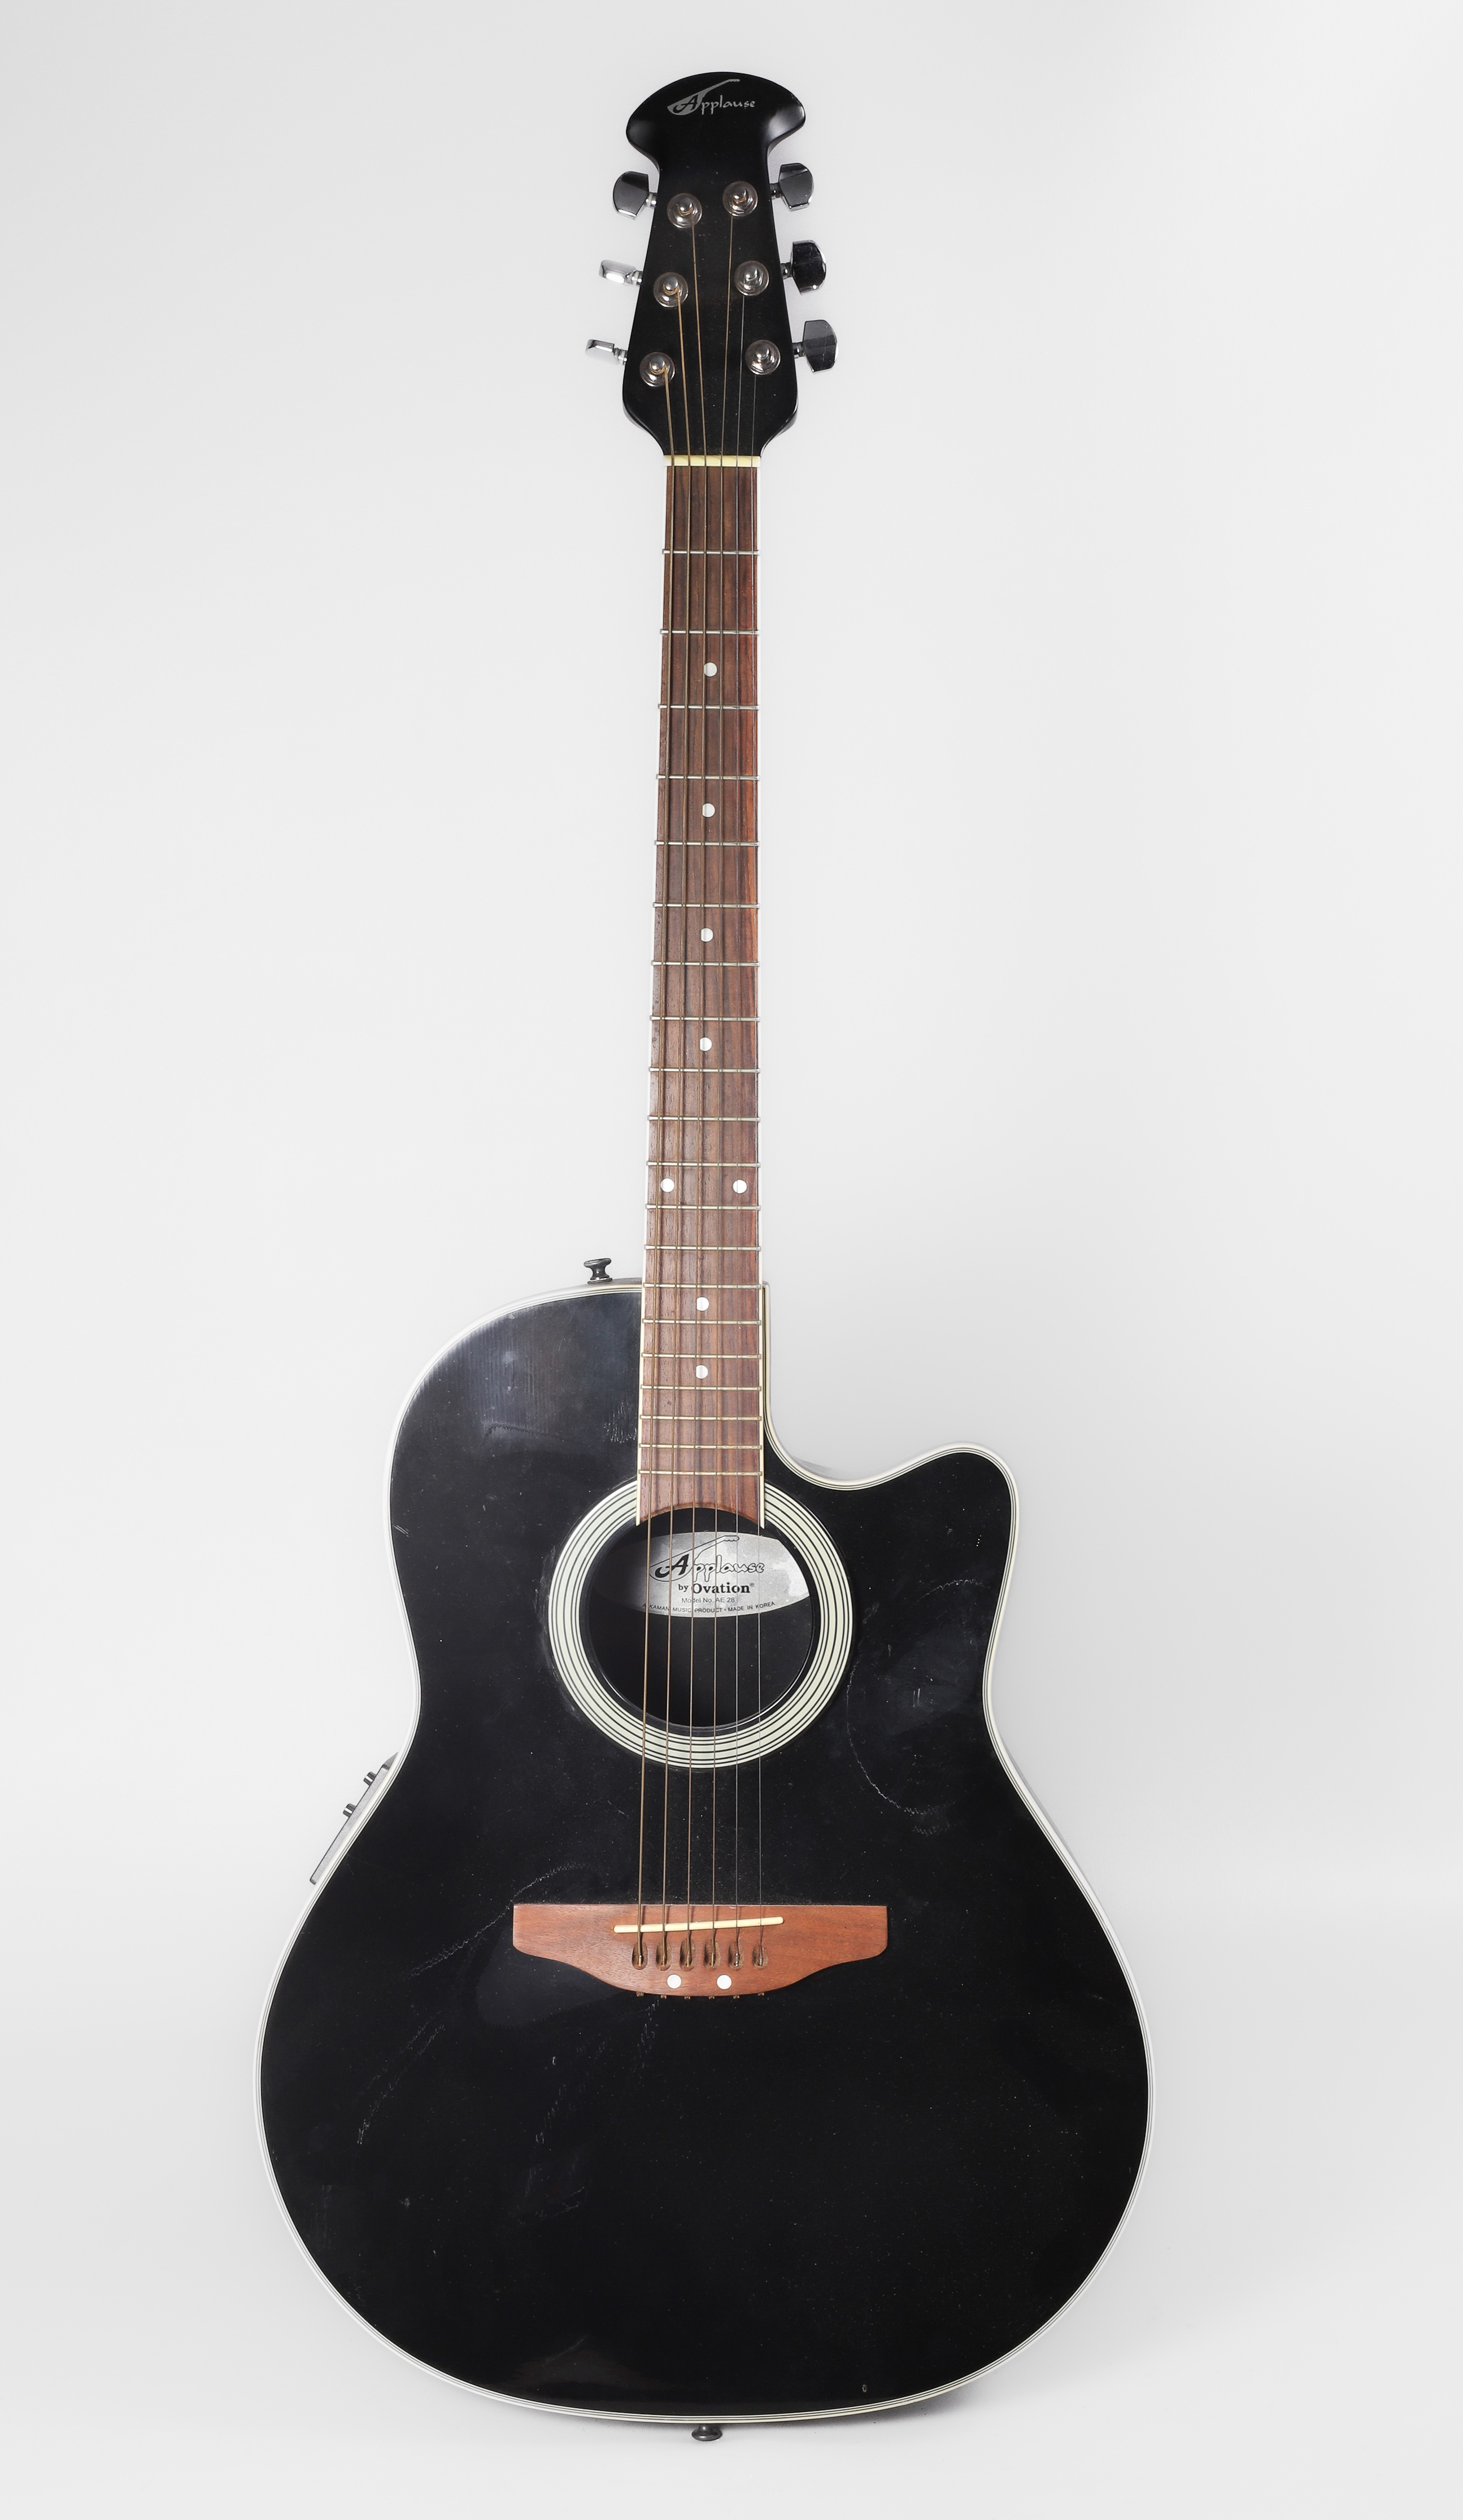 Kaman Applause by Ovation 6-string